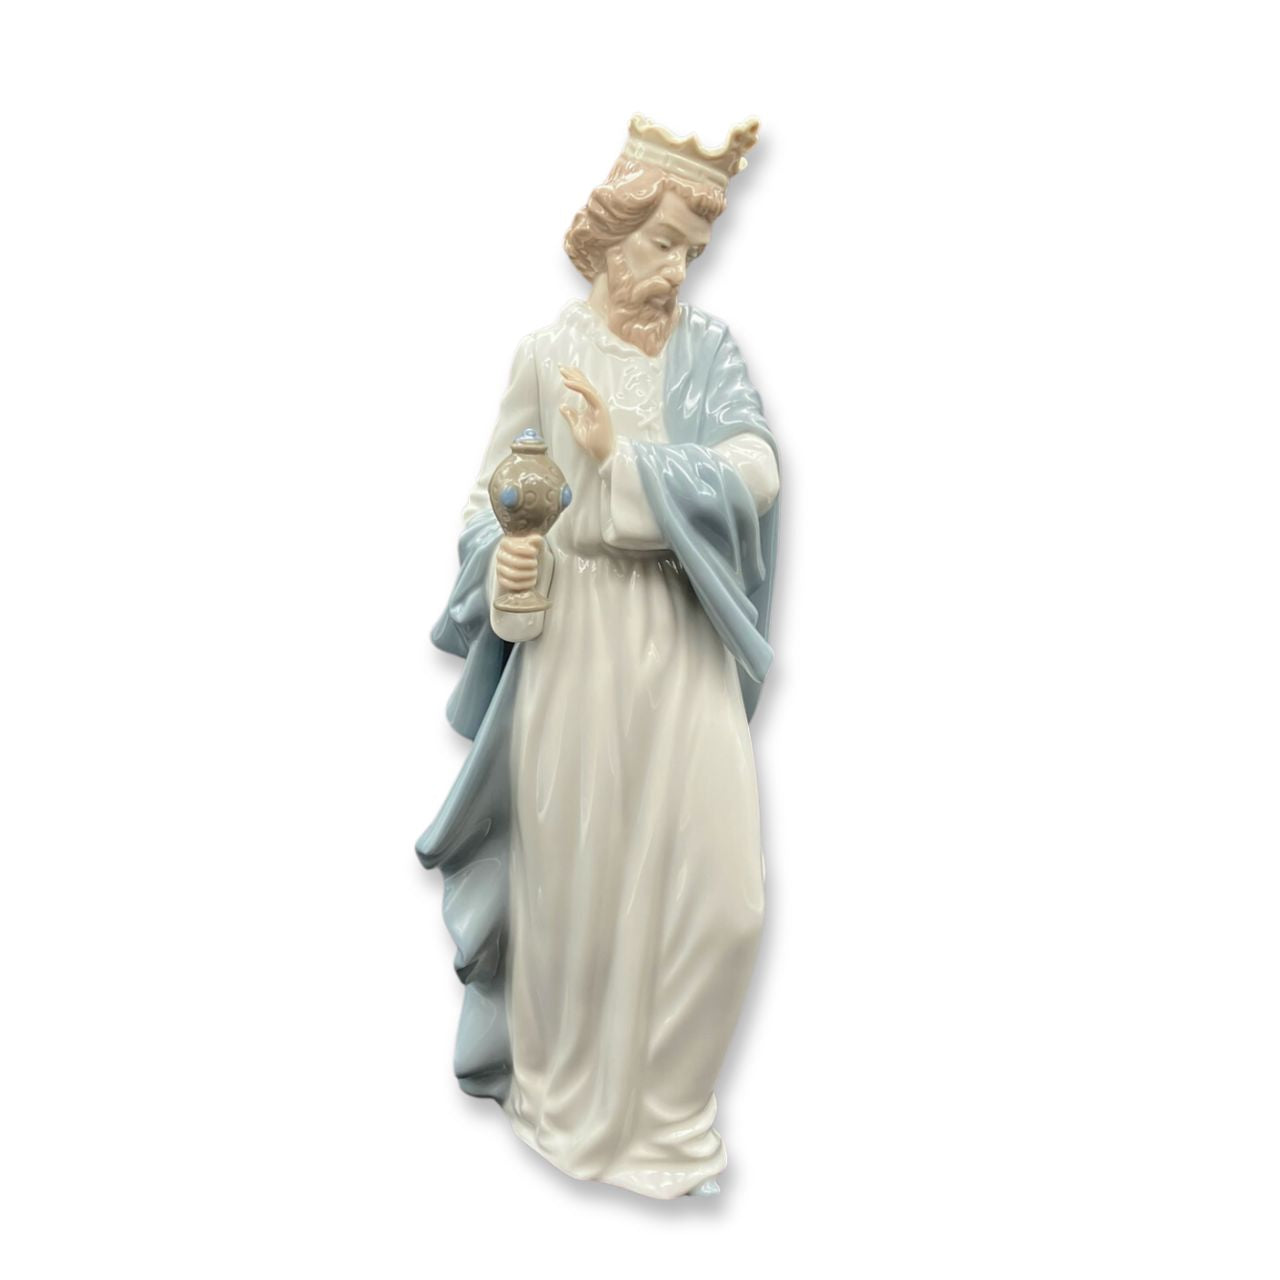 Nao by Lladro King Gaspar with Cup Wisemen  Nao porcelain figurine “King Gaspar with Cup” from the Christmas Collection.  Sculpted by Regino Torrijos, this figurine is part of the nativity se